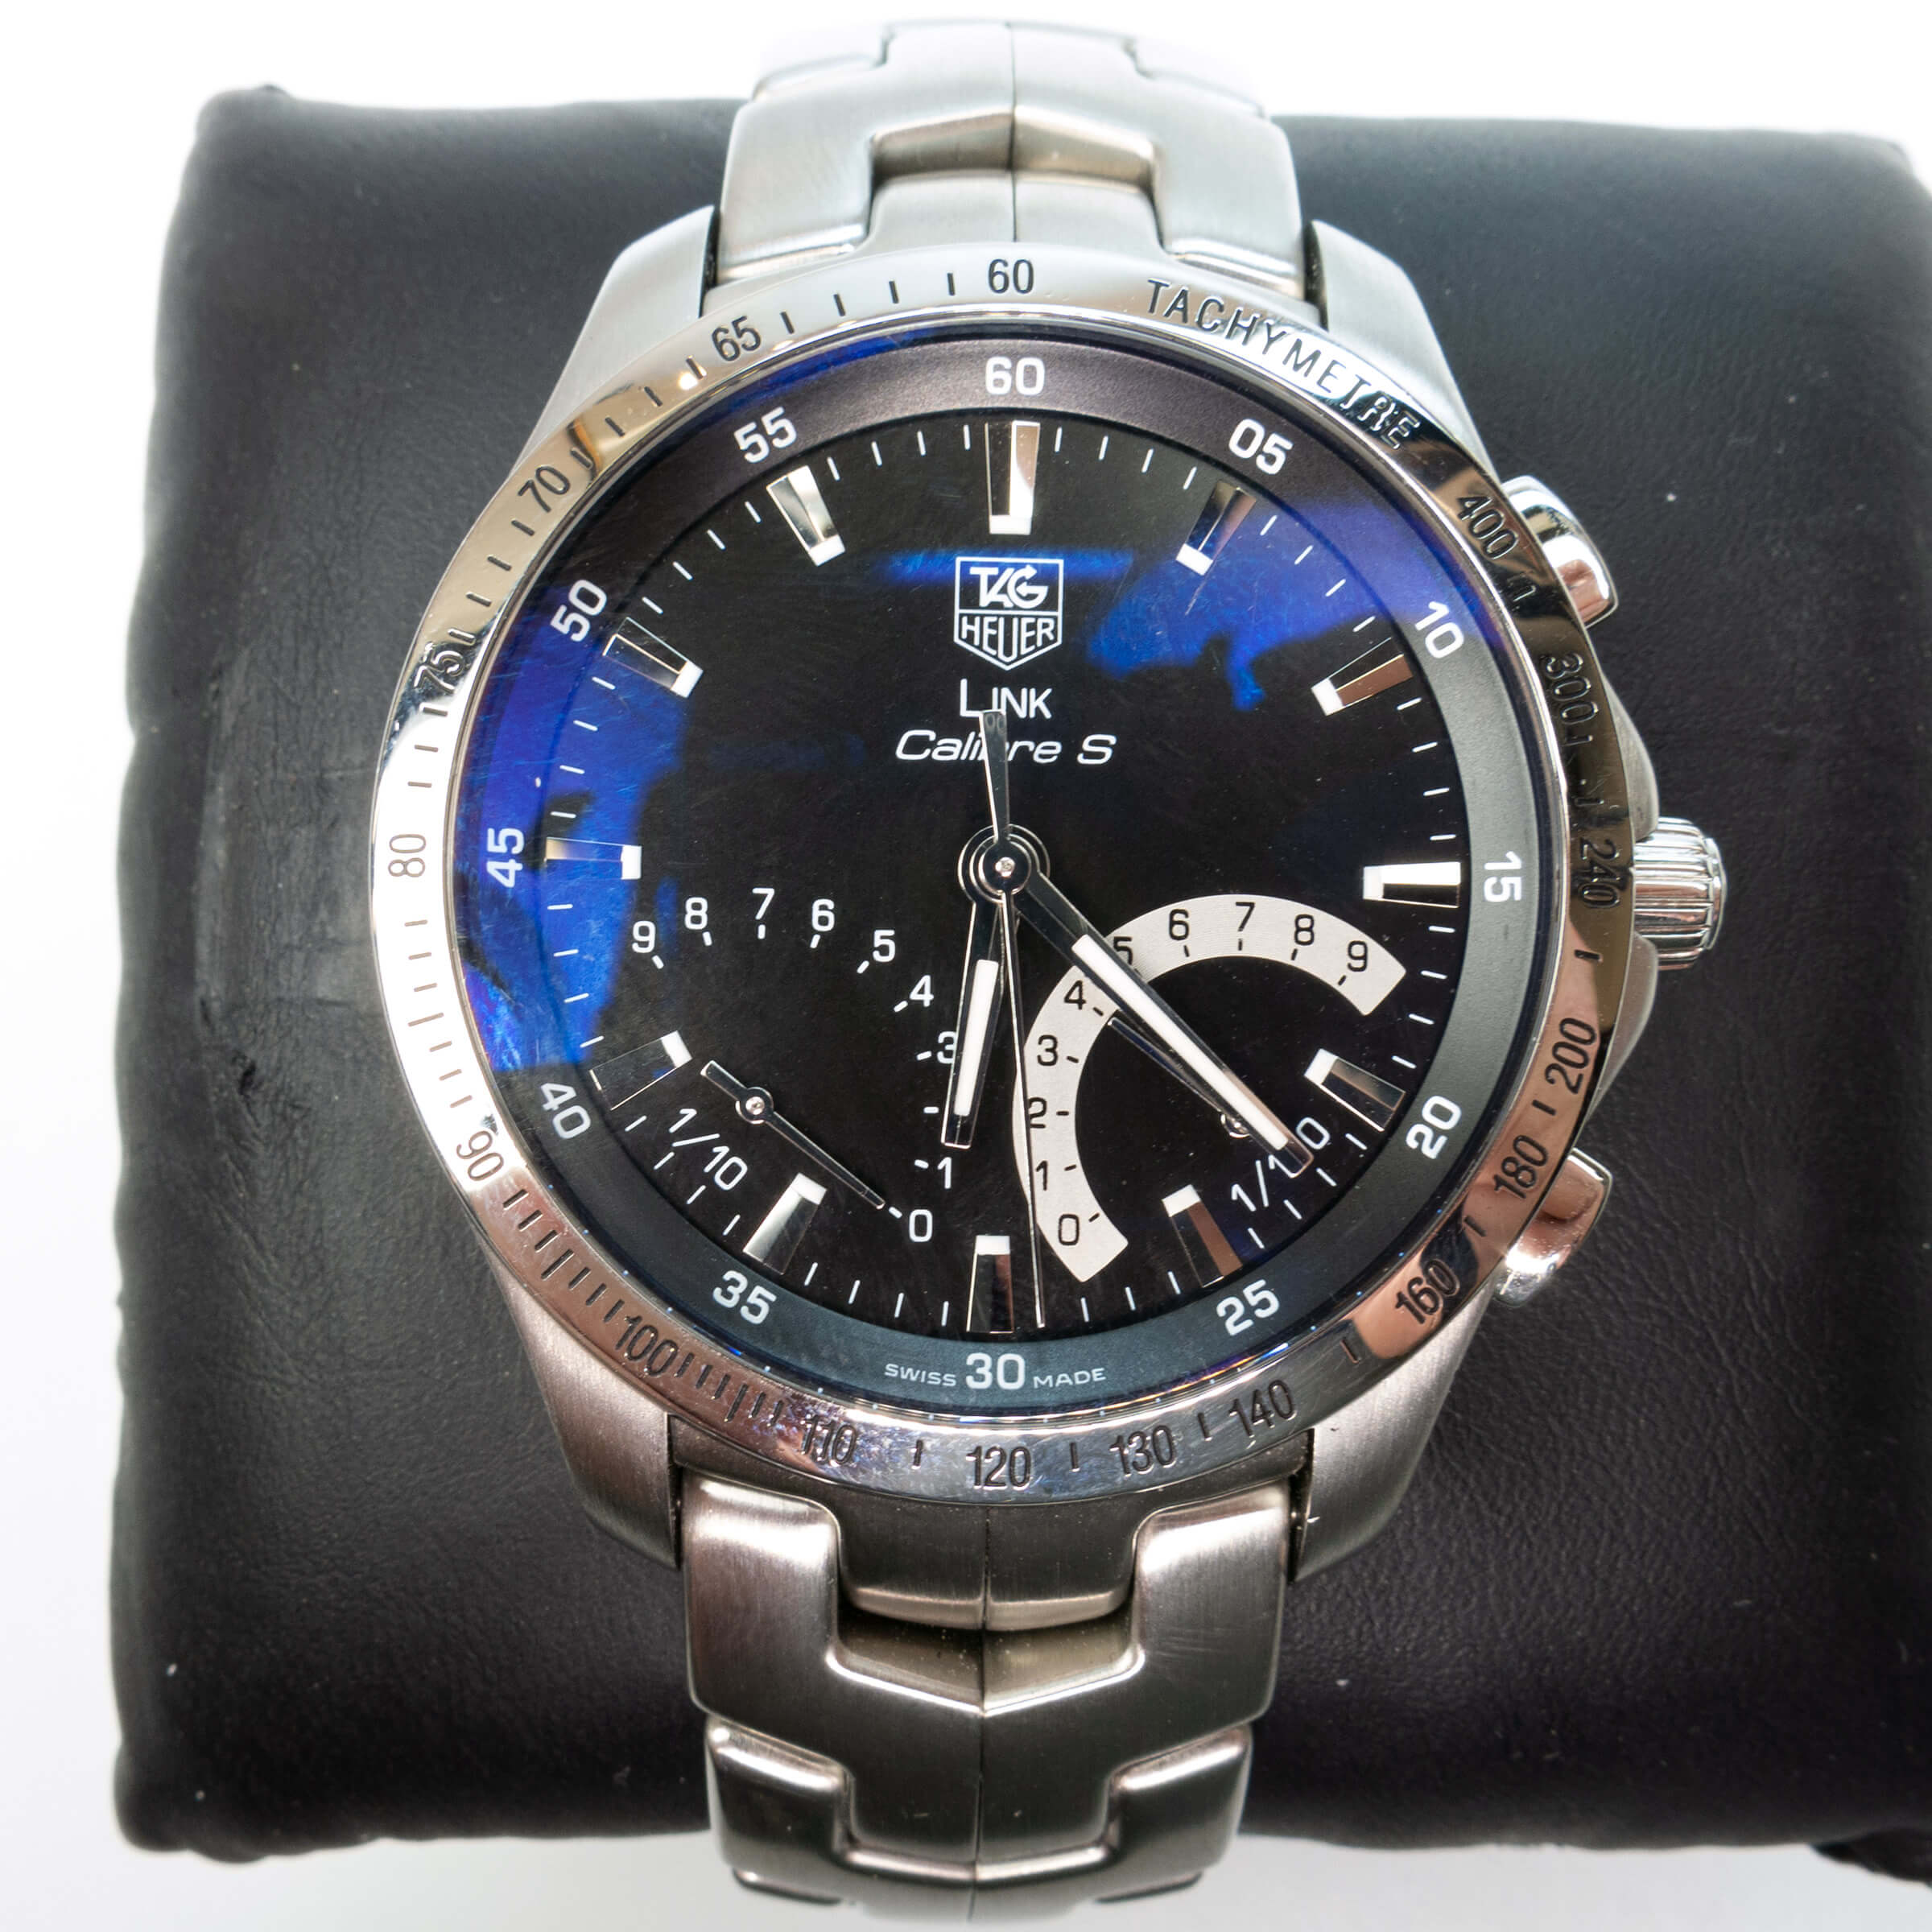 Tag Calibre S Wristwatch With Chronograph